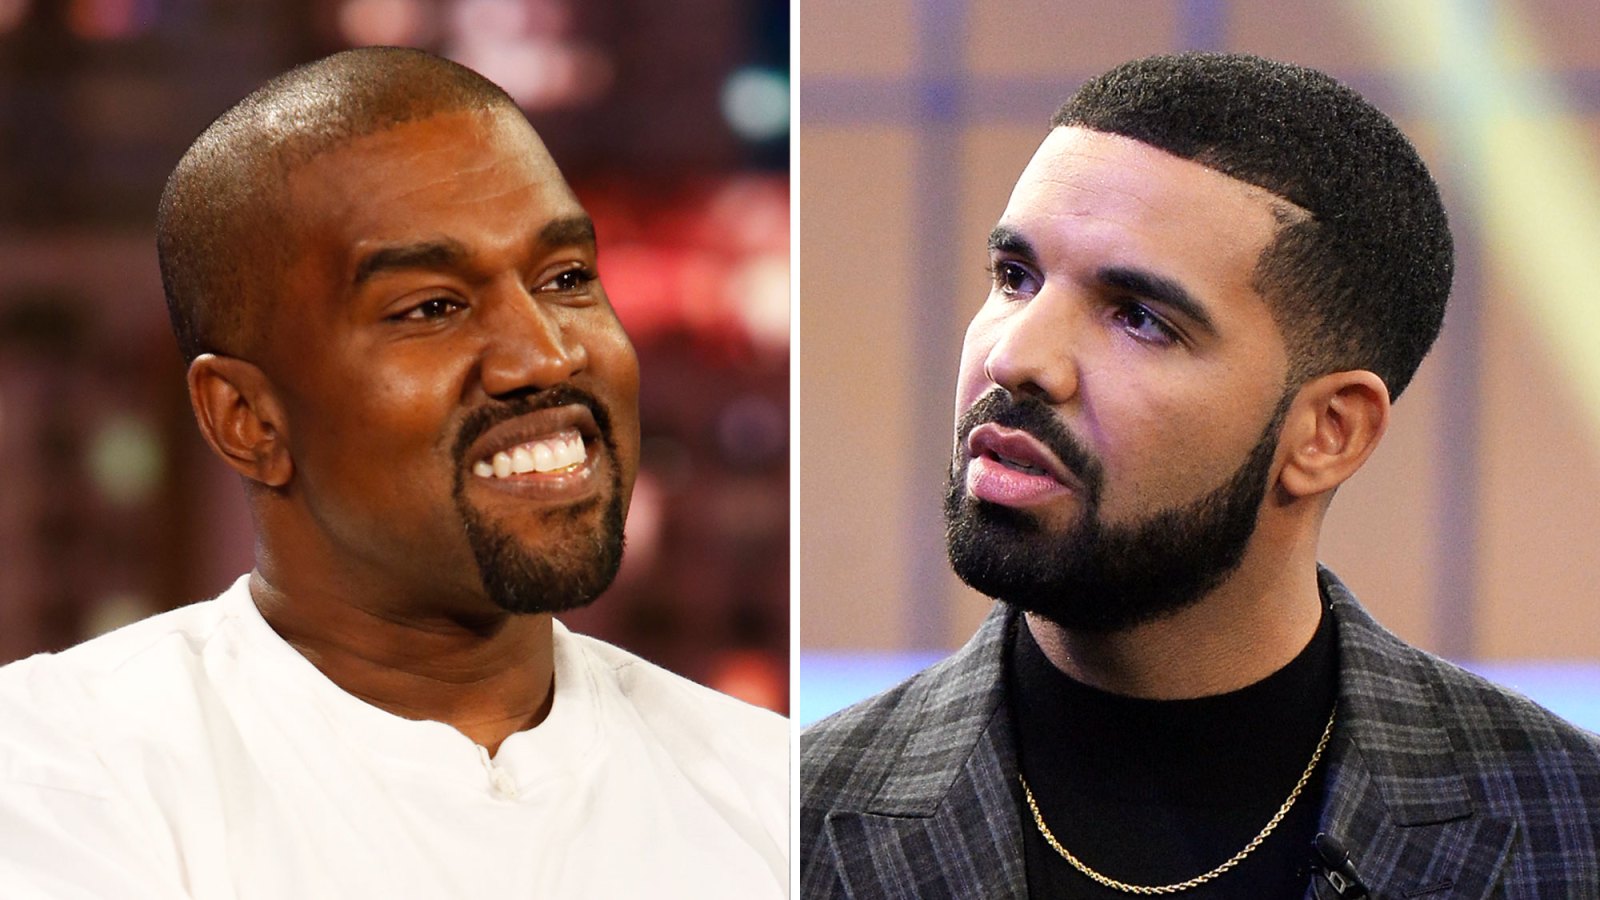 Kanye West and Drake twitter apology rap feud